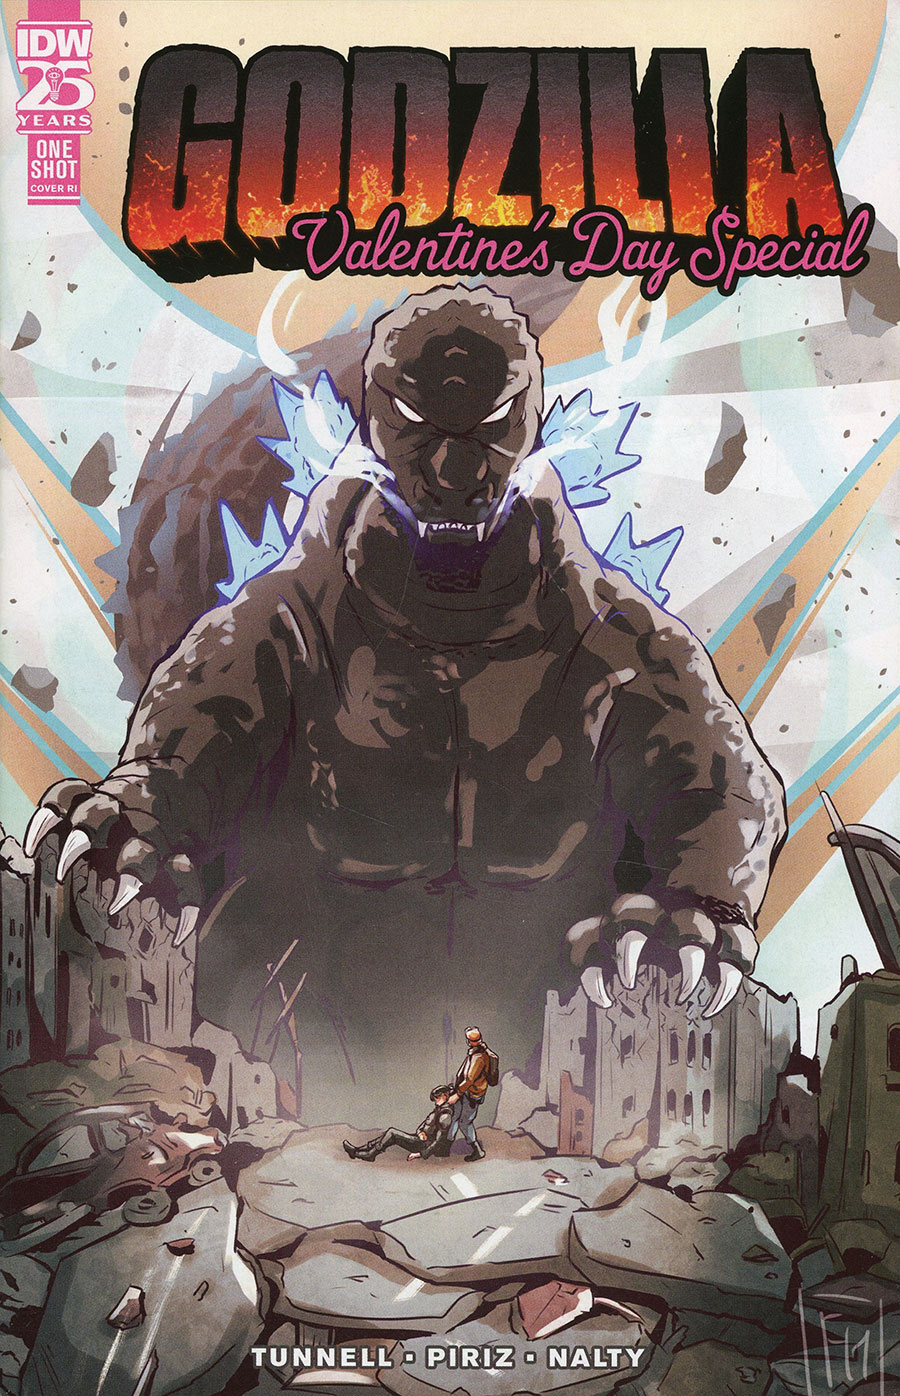 Godzilla Valentines Day Special #1 (One Shot) Cover C Incentive Fell Hound Variant Cover